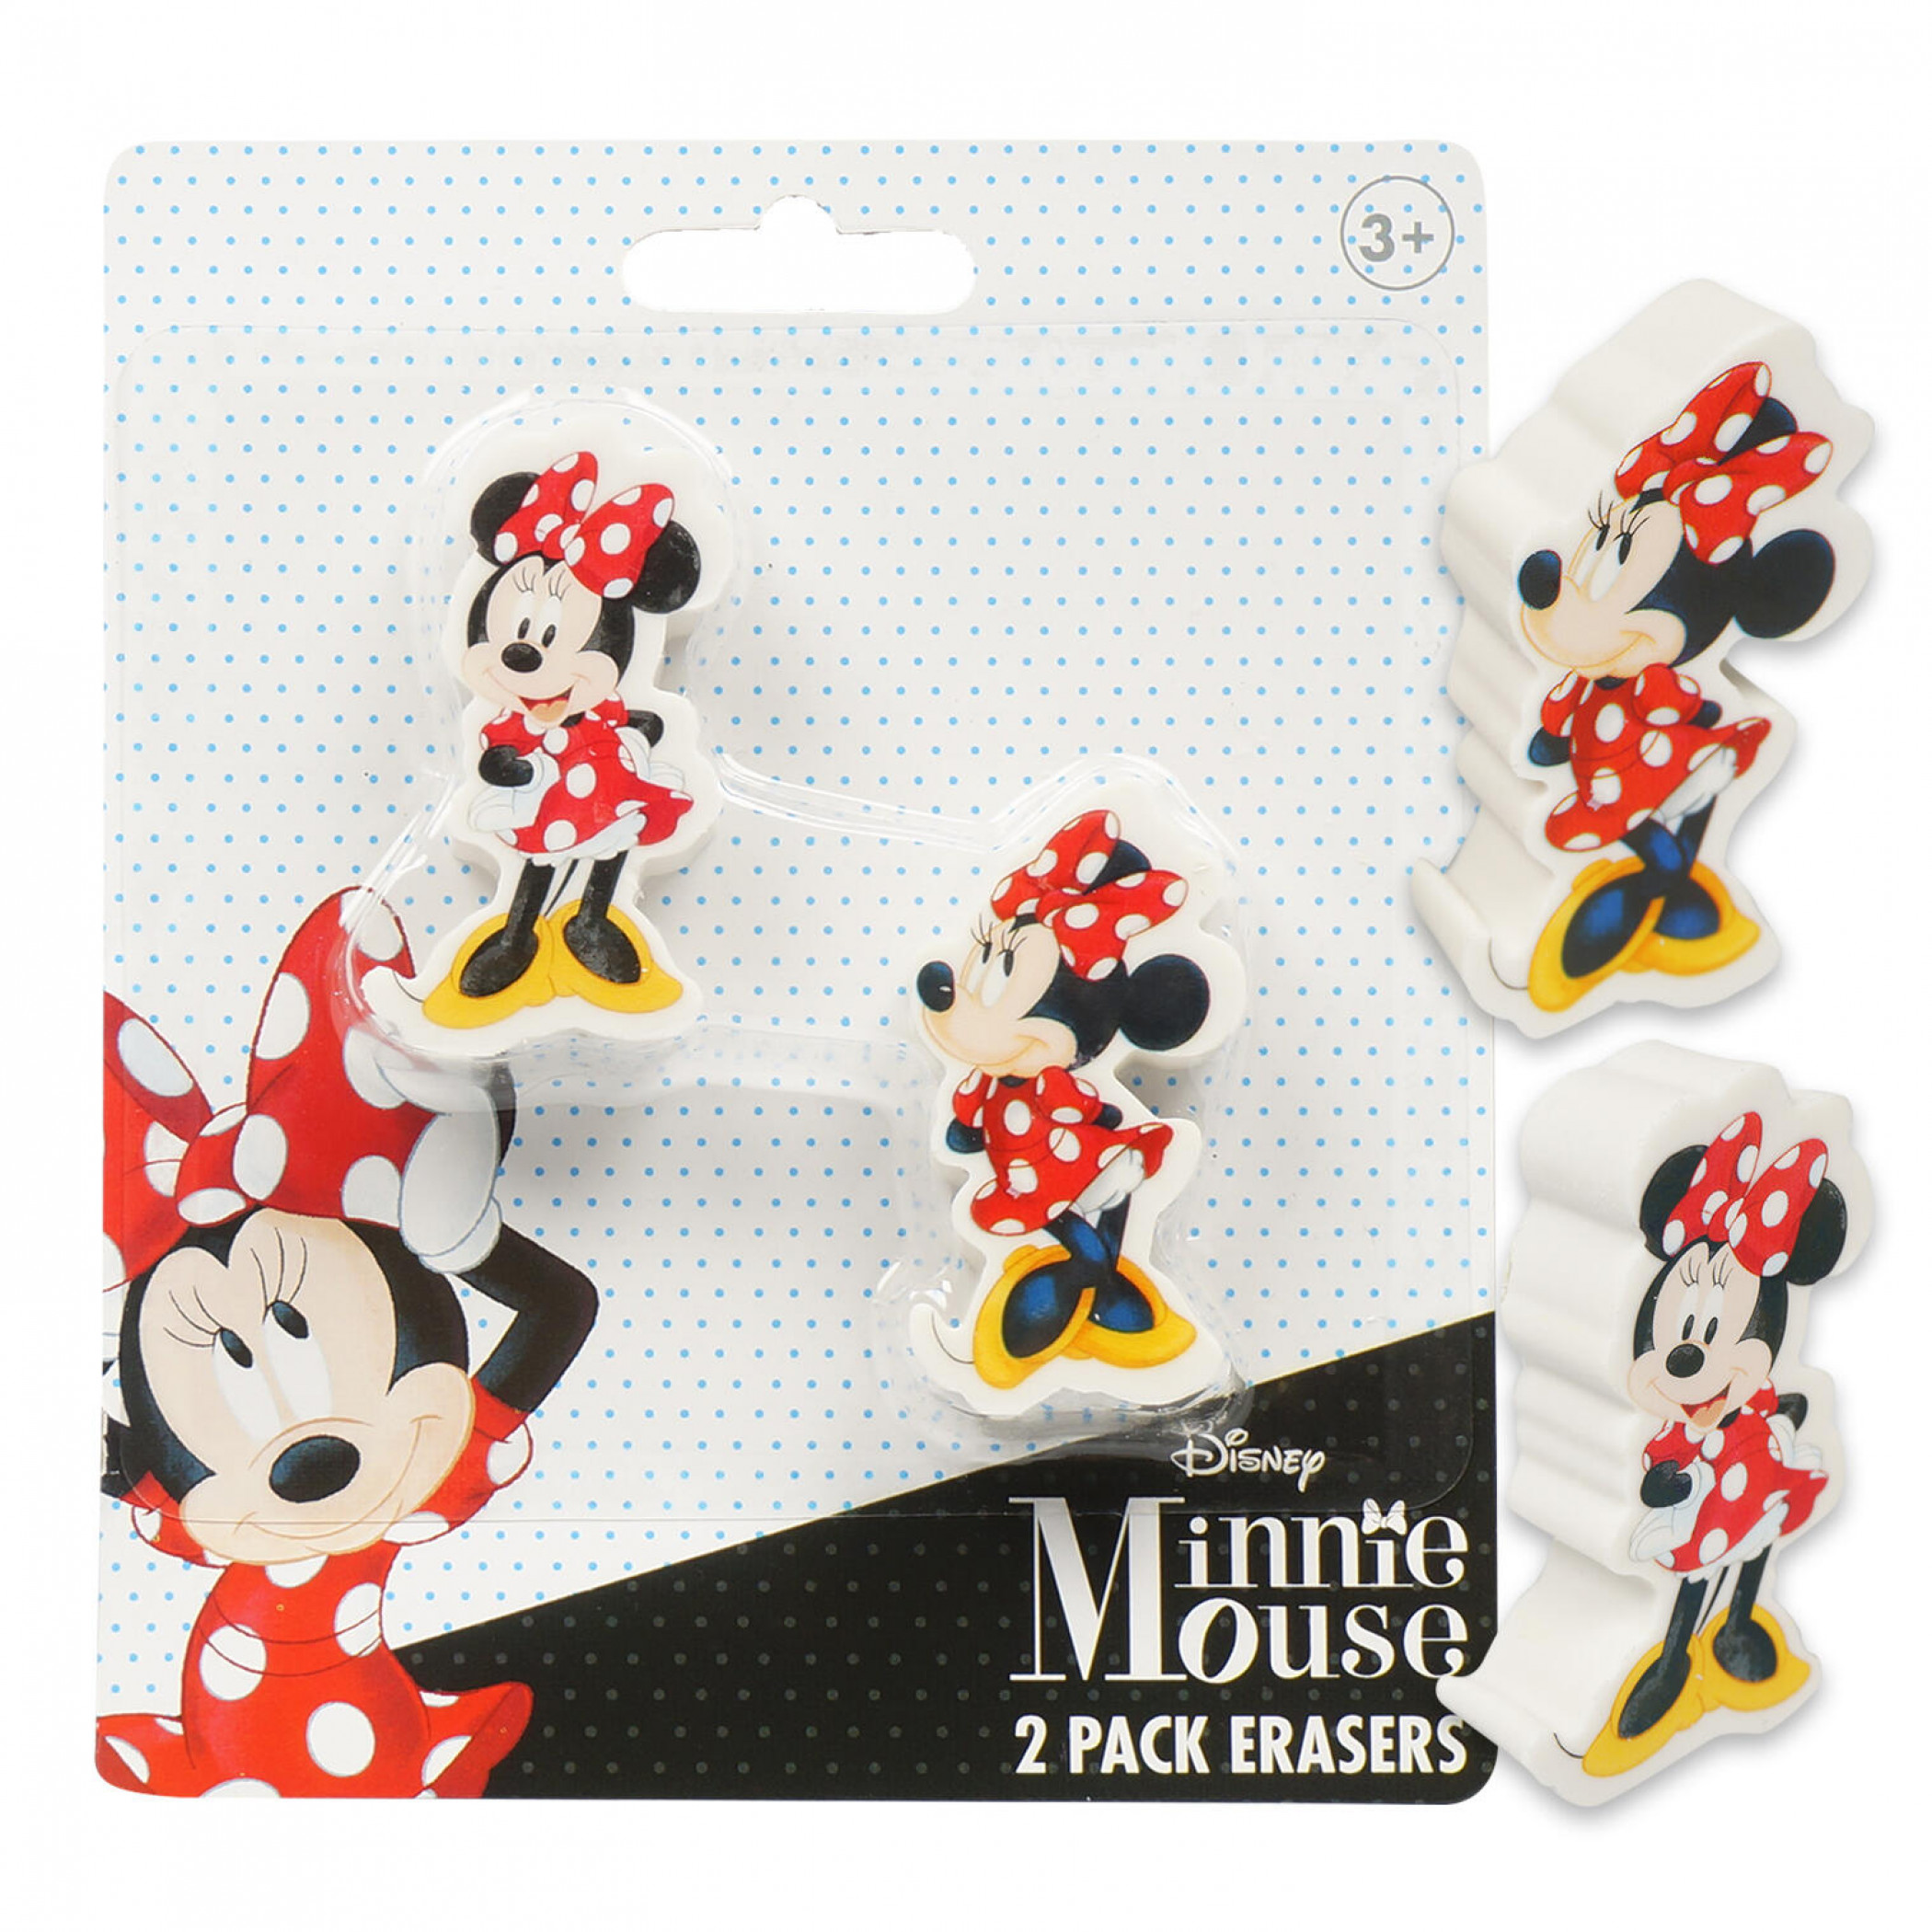 Minnie Mouse Disney 2-Pack Erasers